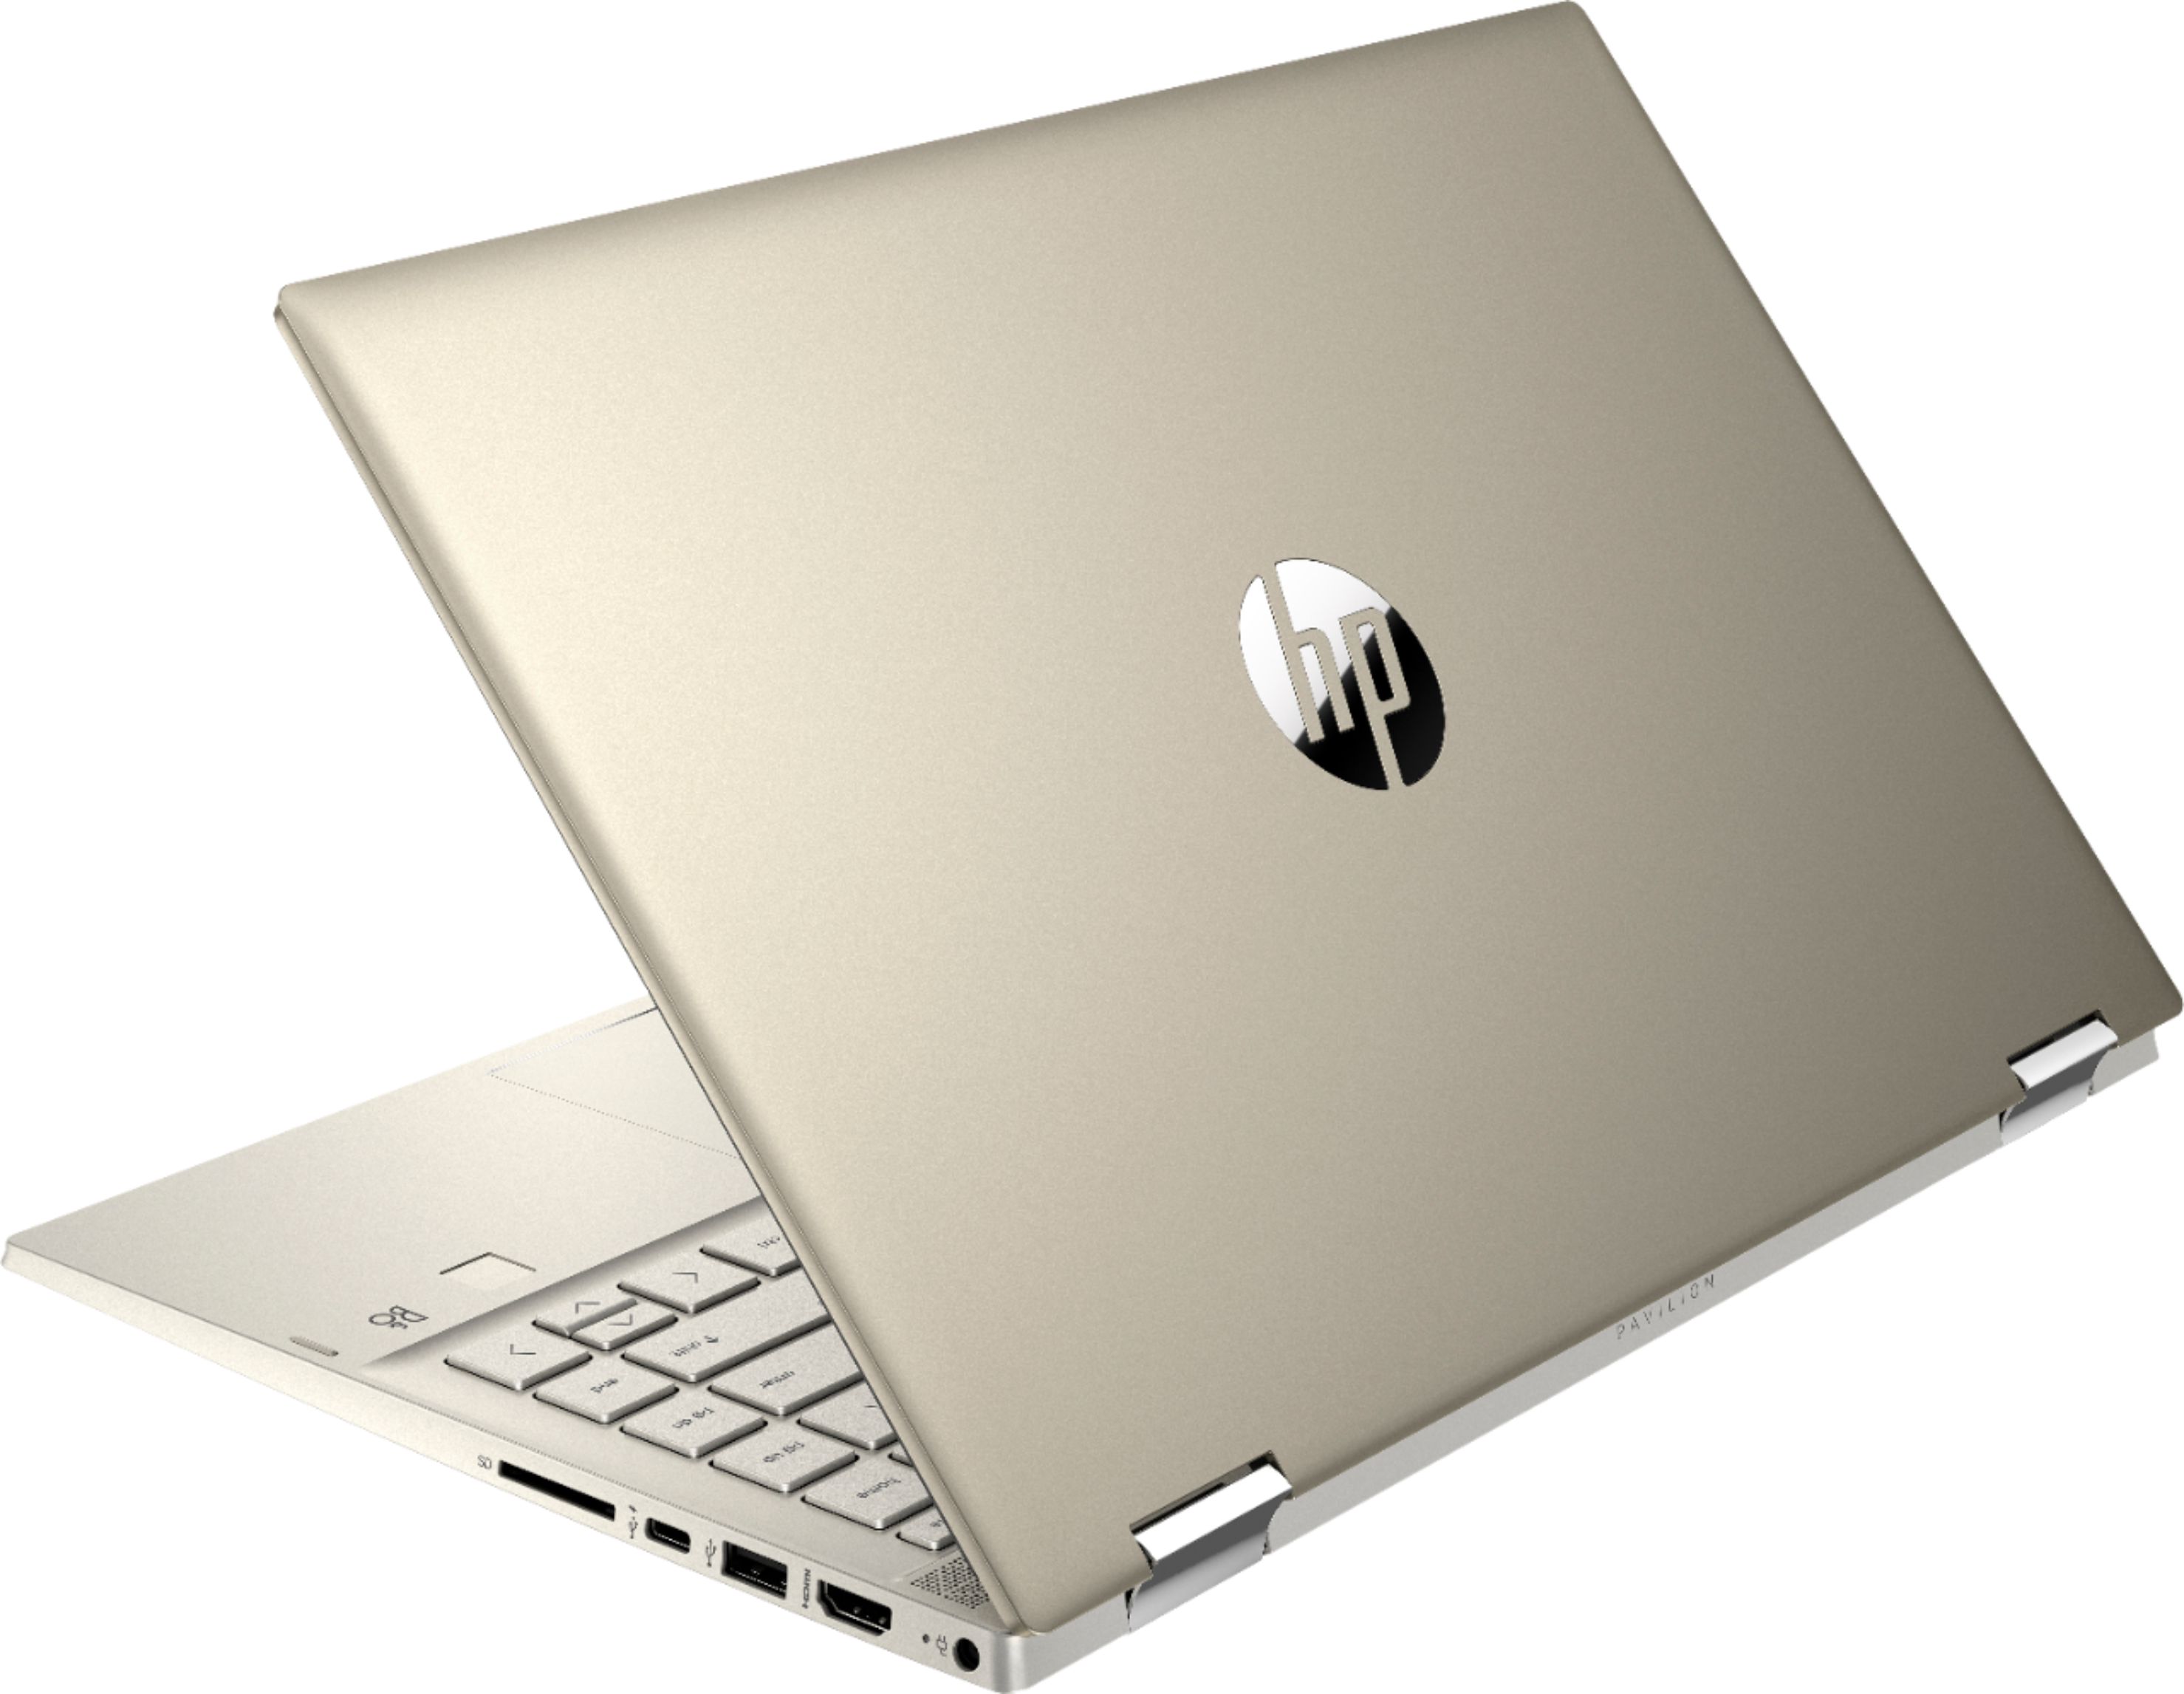 Customer Reviews Hp Pavilion X360 2 In 1 14 Touch Screen Laptop Intel Core I5 8gb Memory 256gb 1704